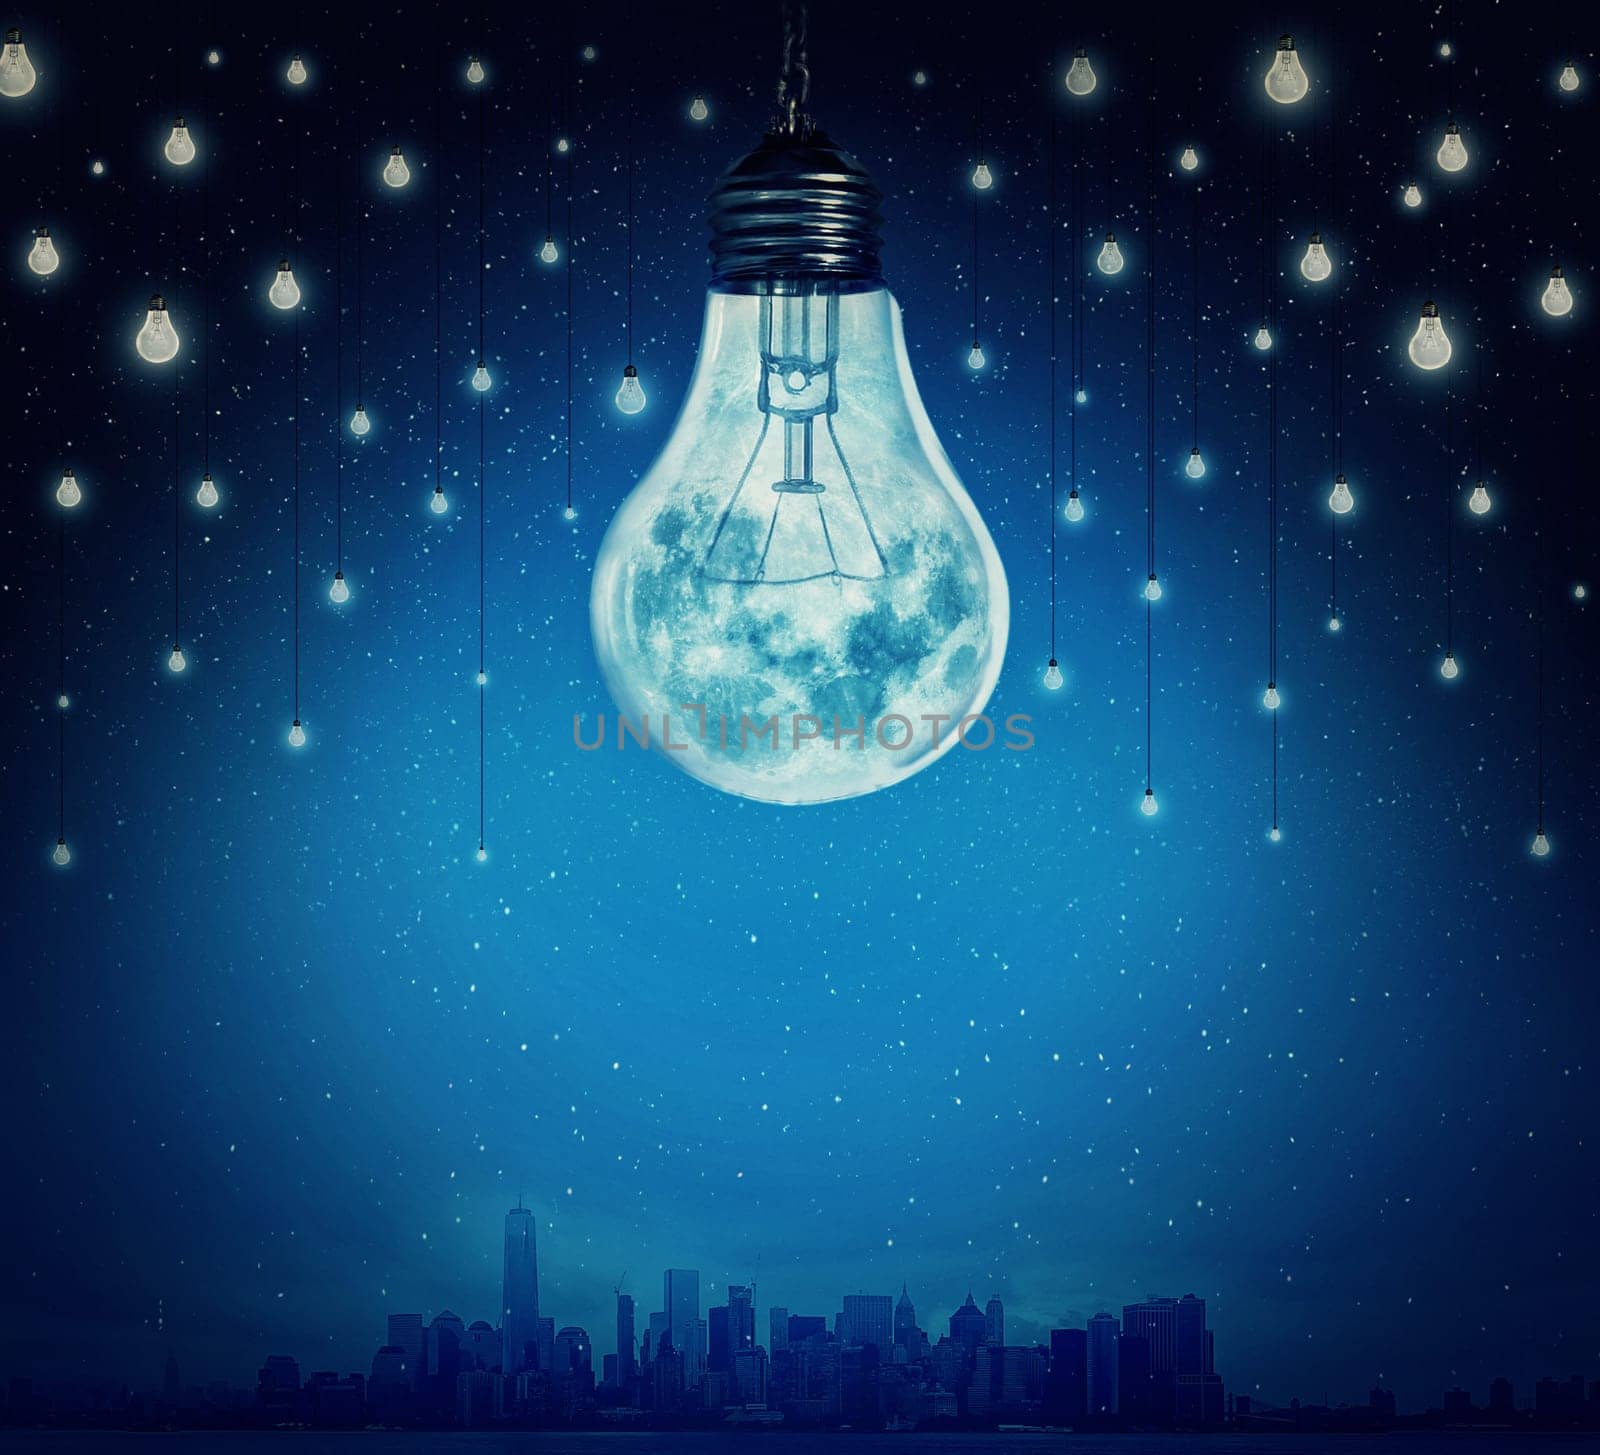 Moon and stars in shape of bulbs light over a city. Surreal background. Alternative energy concept